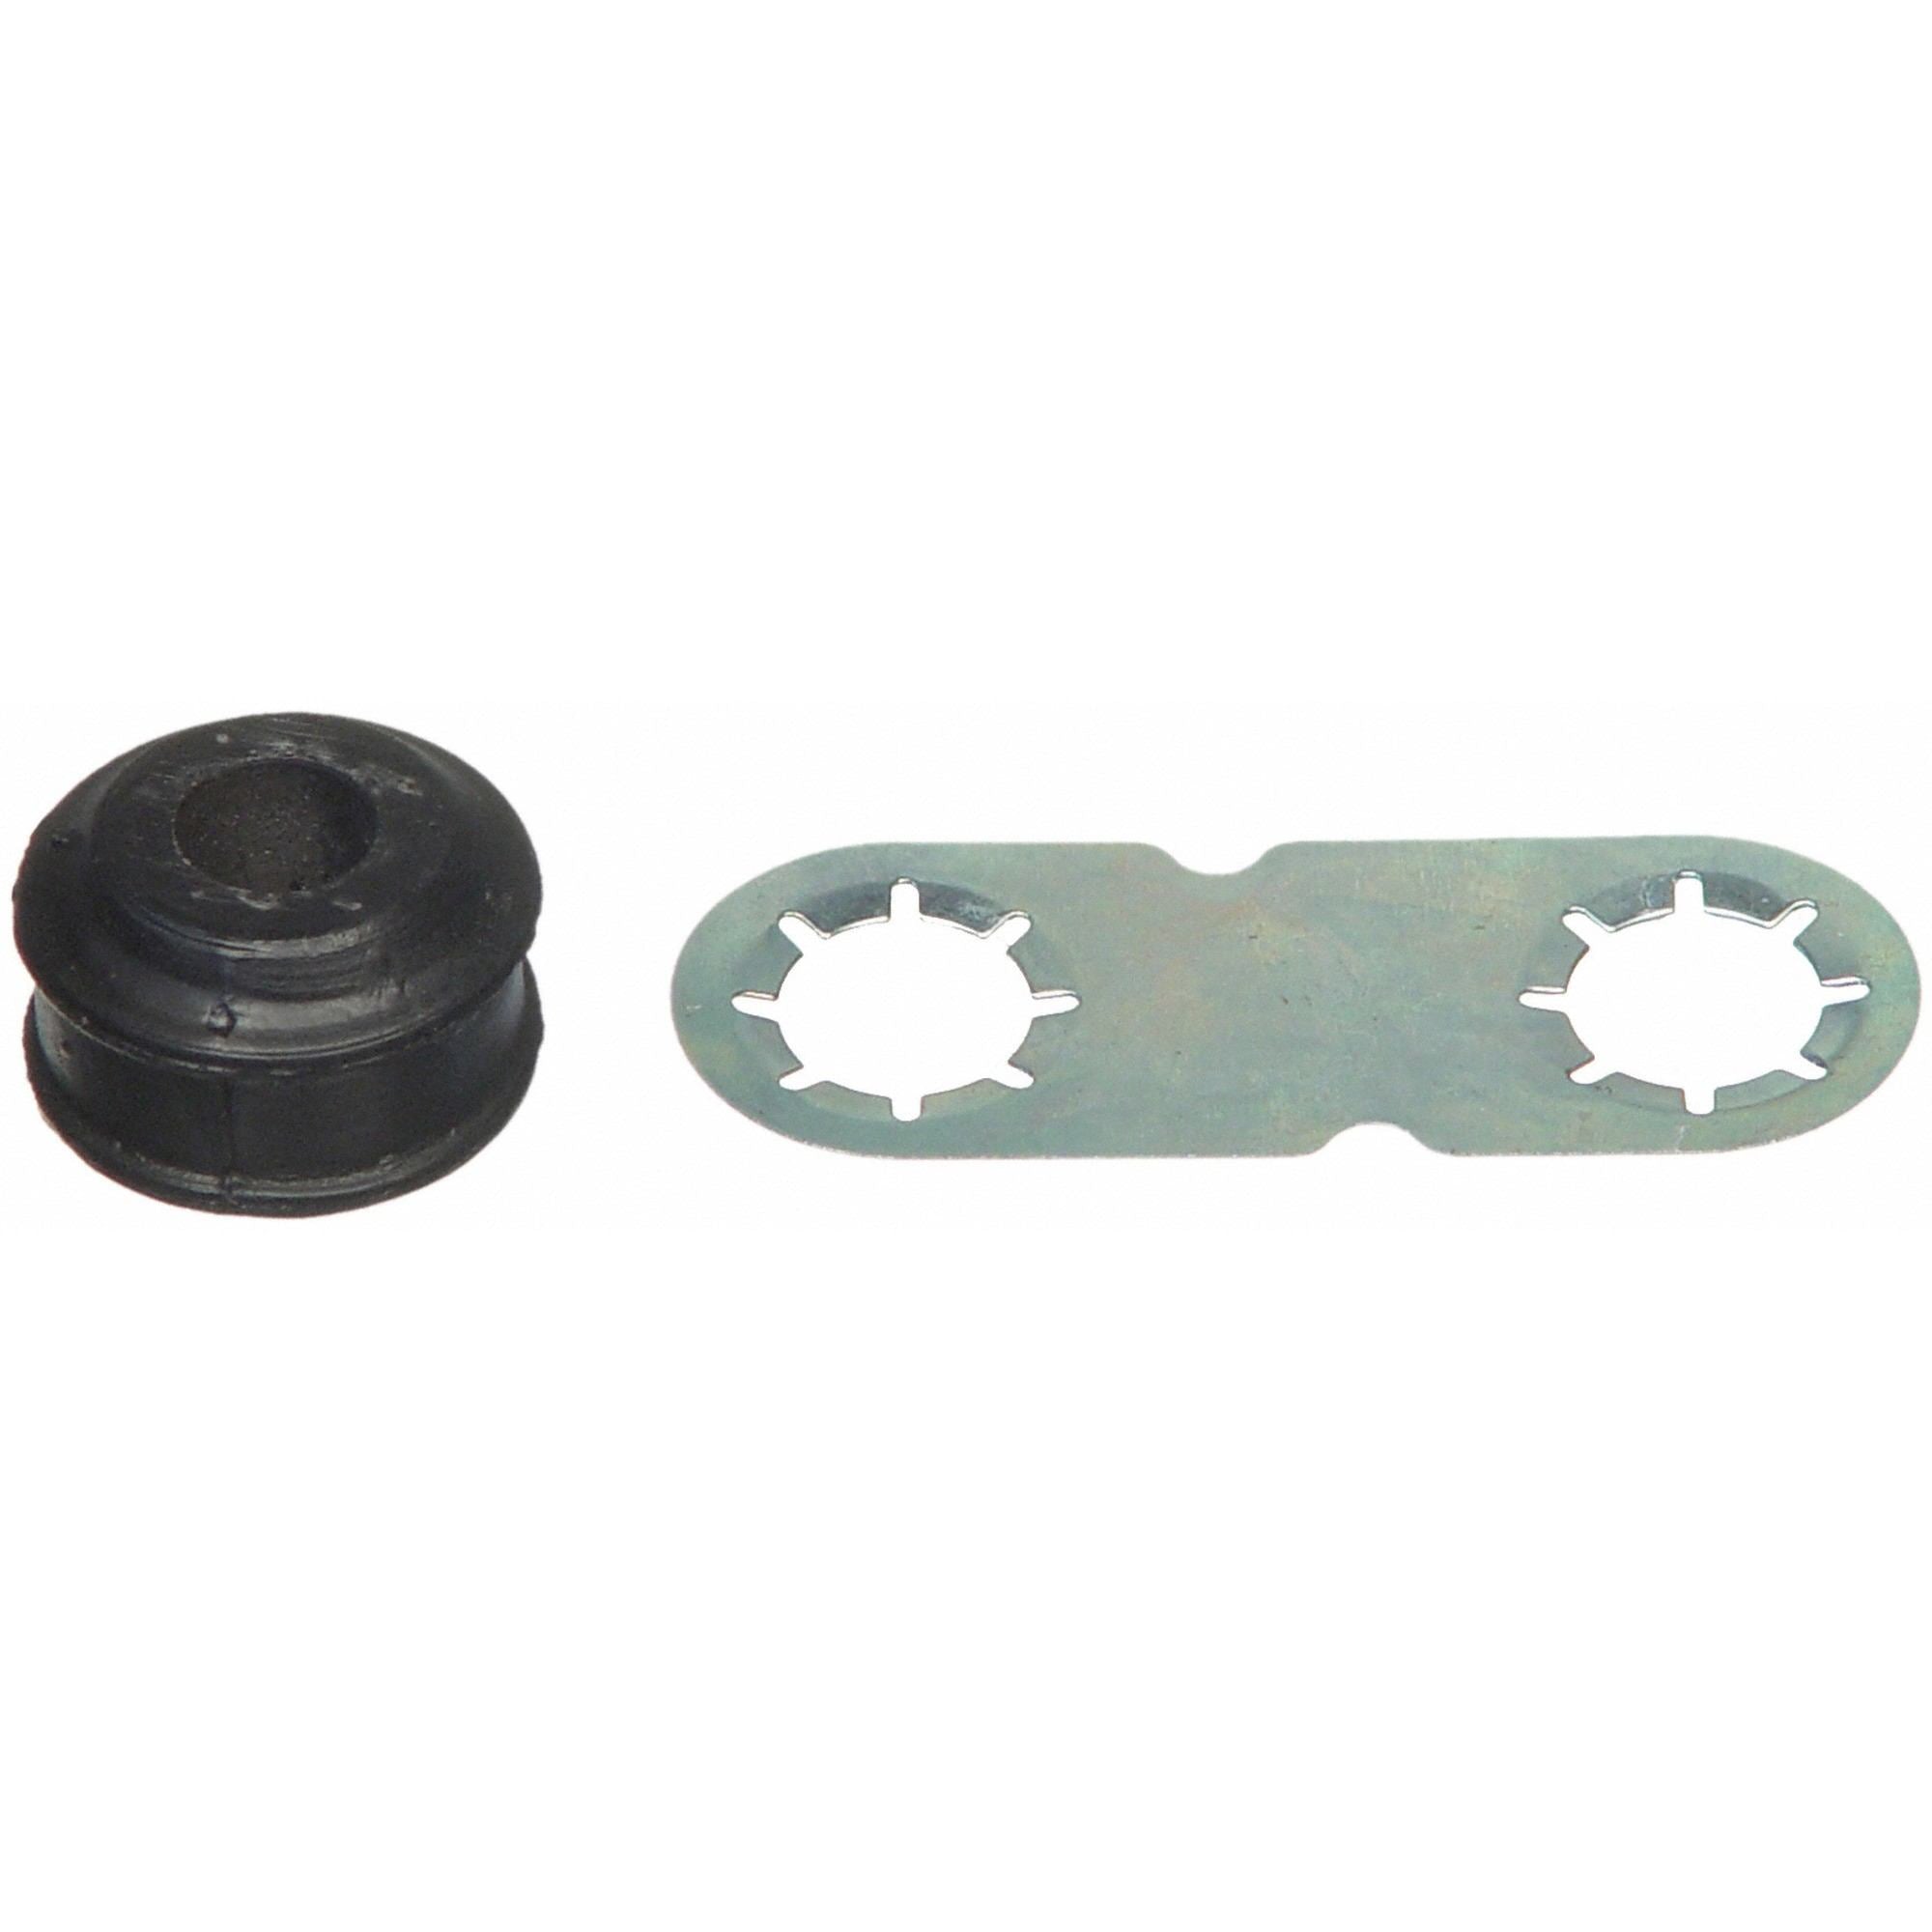 MOOG Chassis Products Steering Tie Rod End Bushing Kit EV119